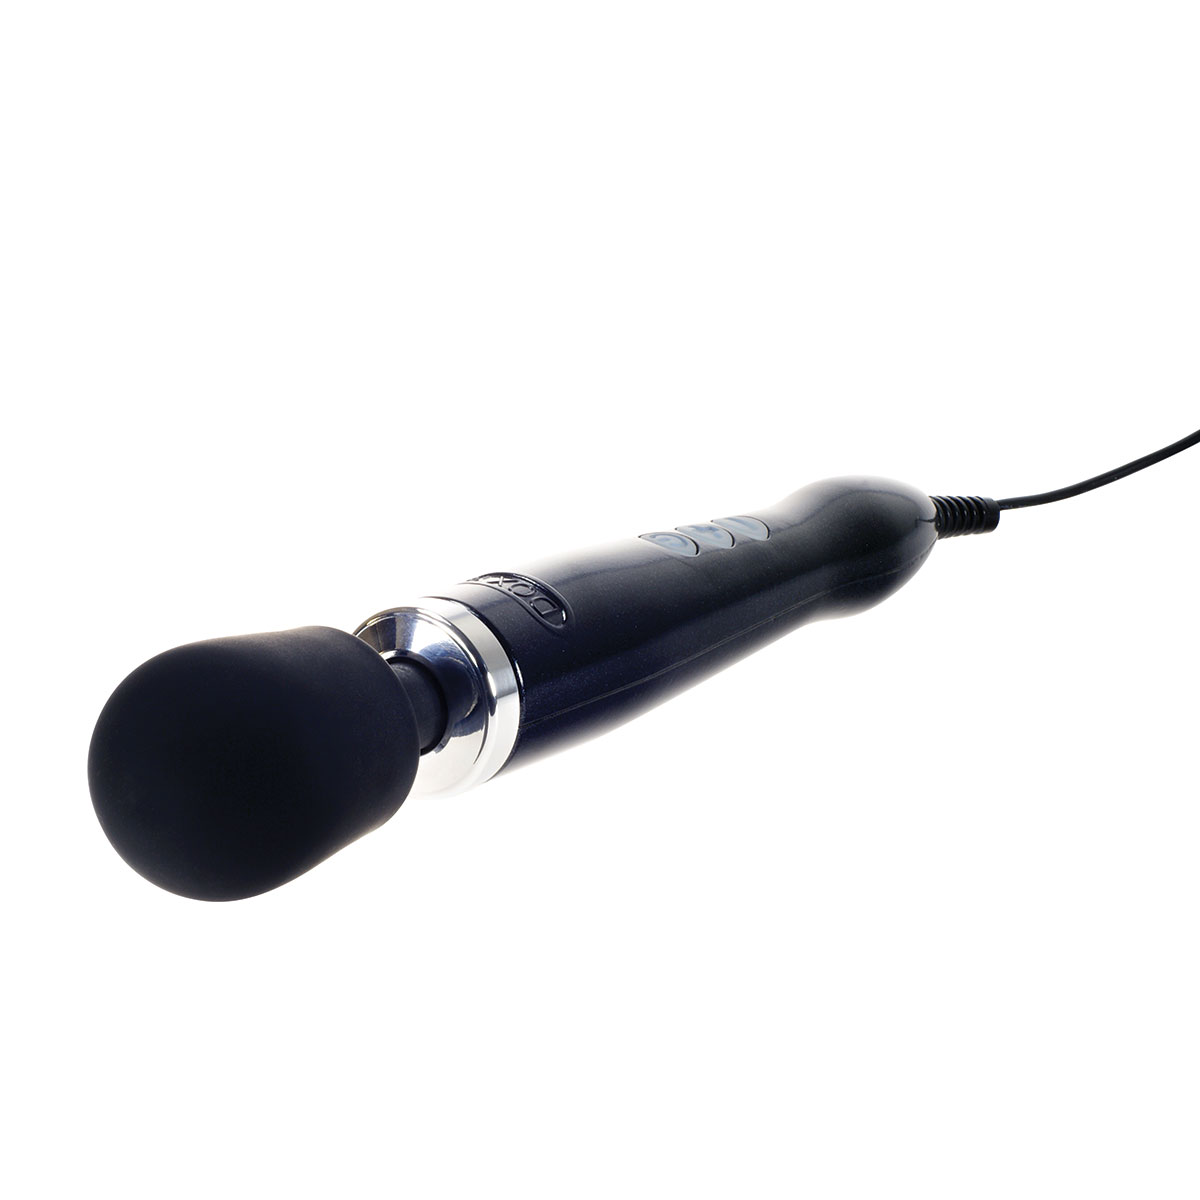 Doxy Die Cast Wand Vibrator Black - image 2 of 2